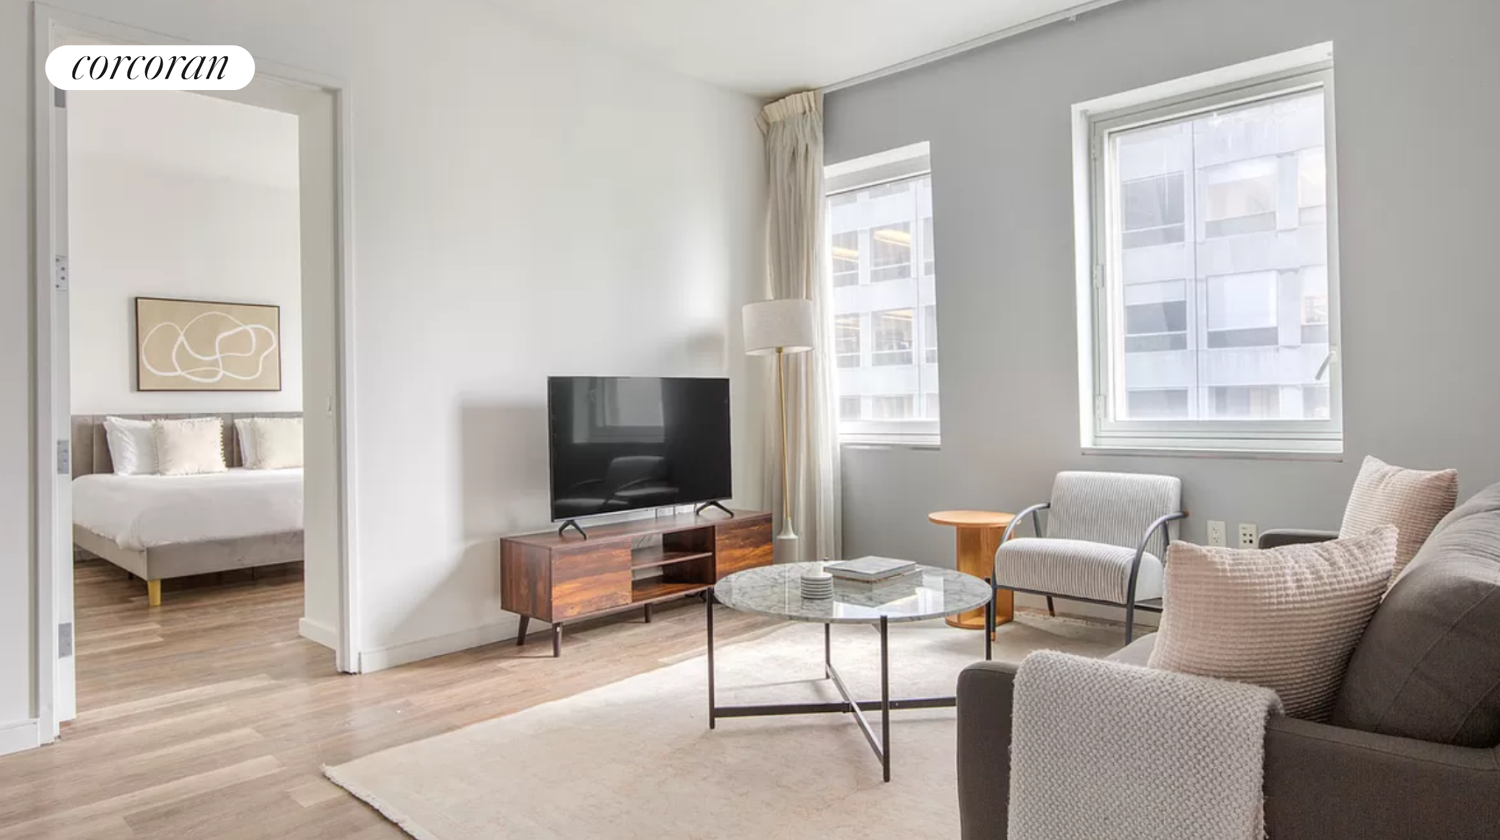 70 West 45th Street 39A, Chelsea And Clinton, Downtown, NYC - 2 Bedrooms  
2.5 Bathrooms  
5 Rooms - 